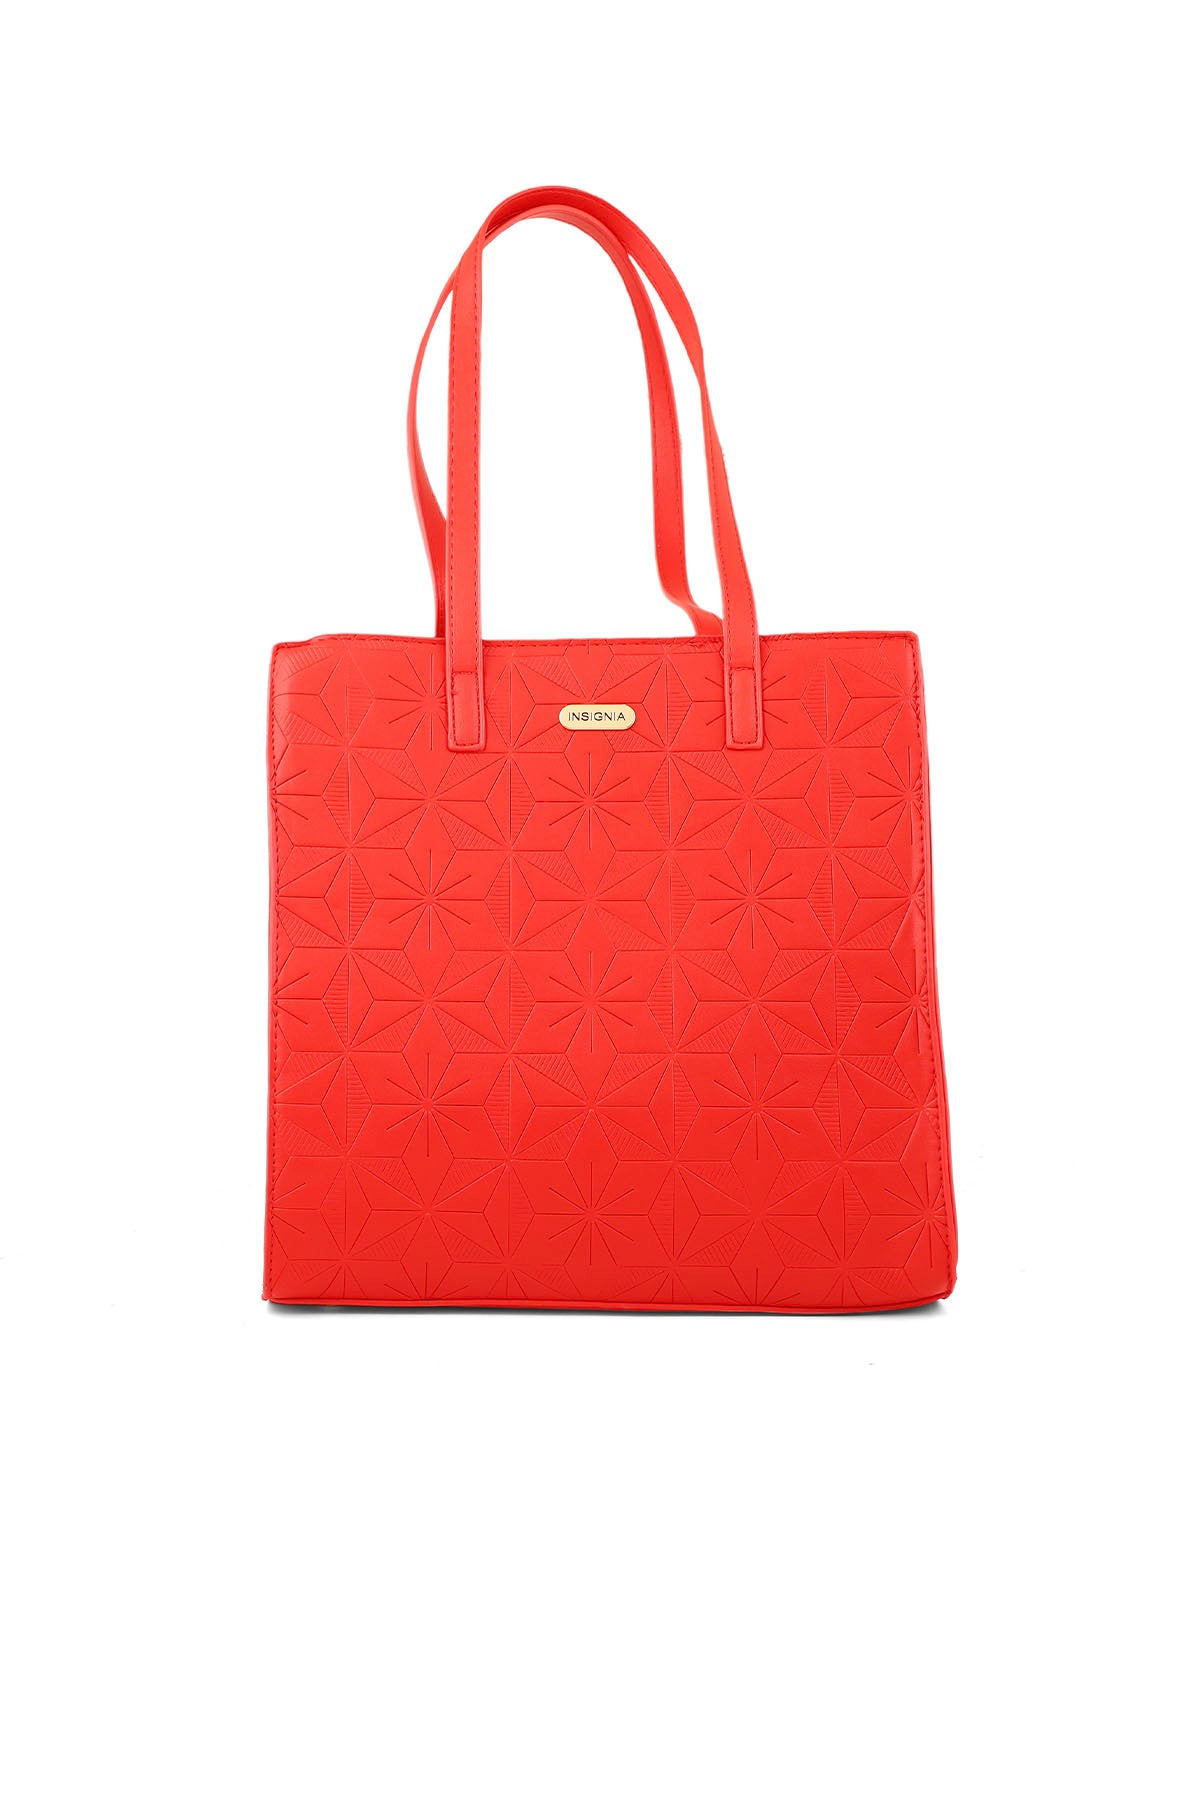 Bucket Hand Bags B15075-Red